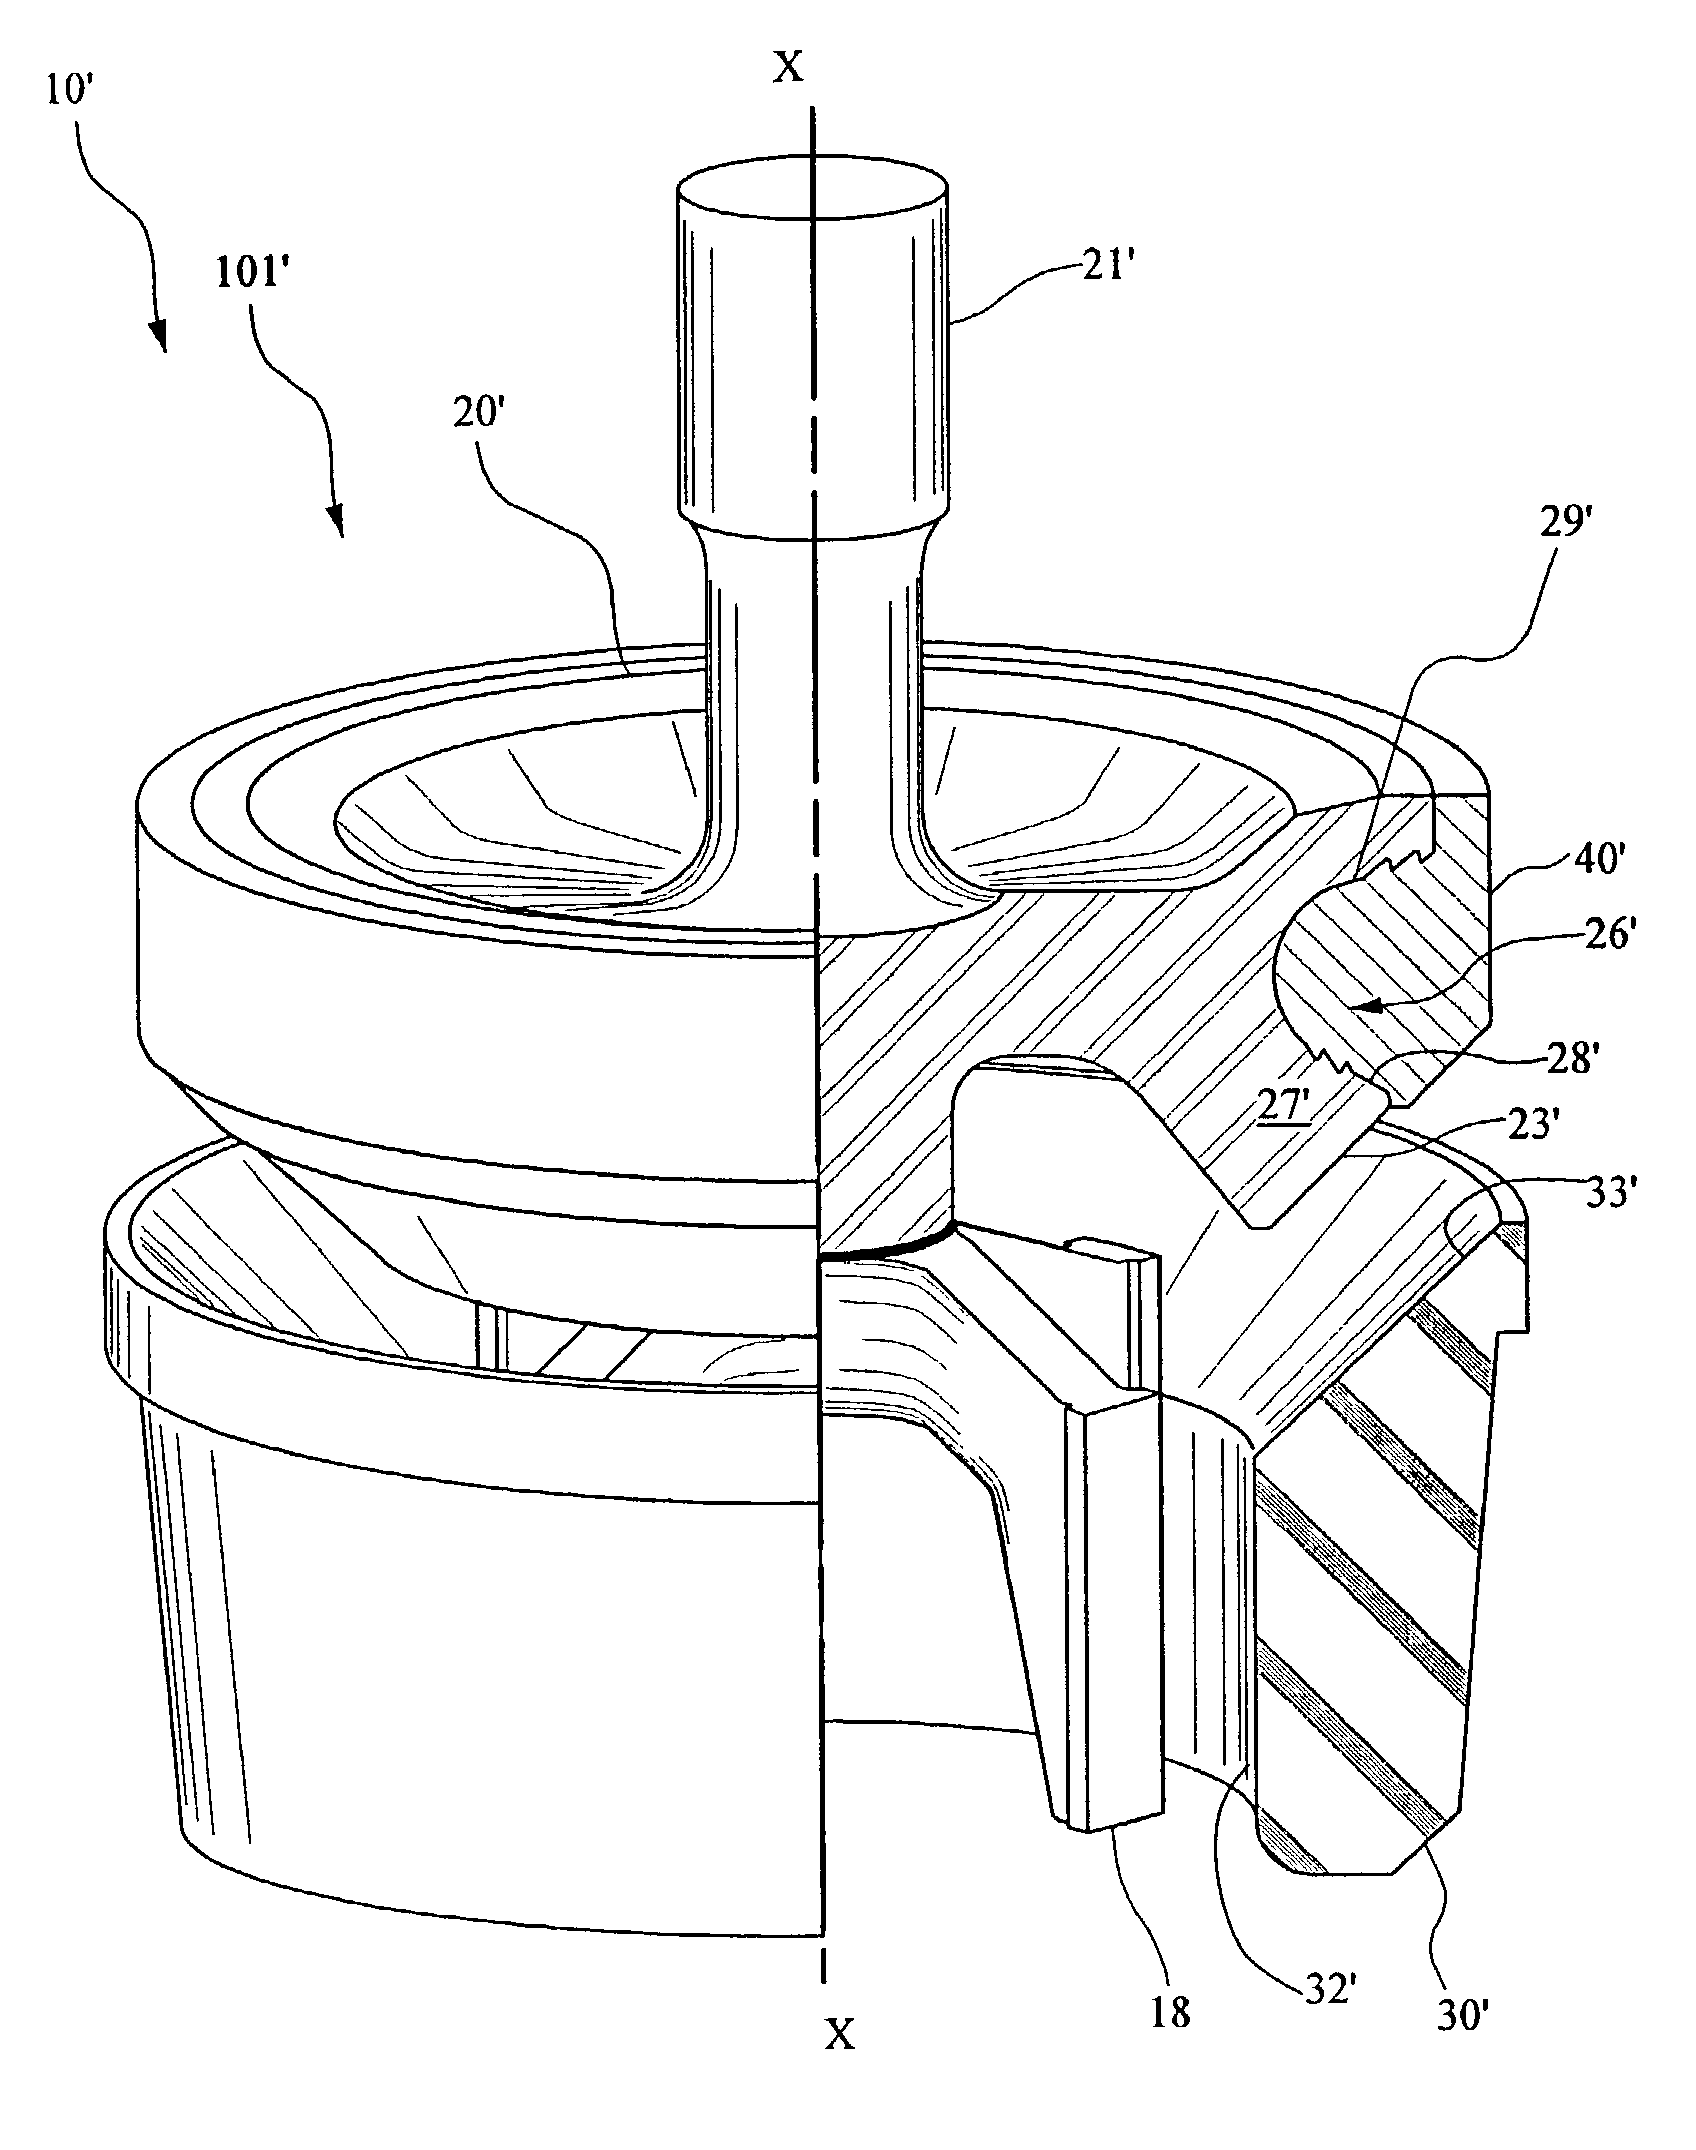 Valve body and seal assembly